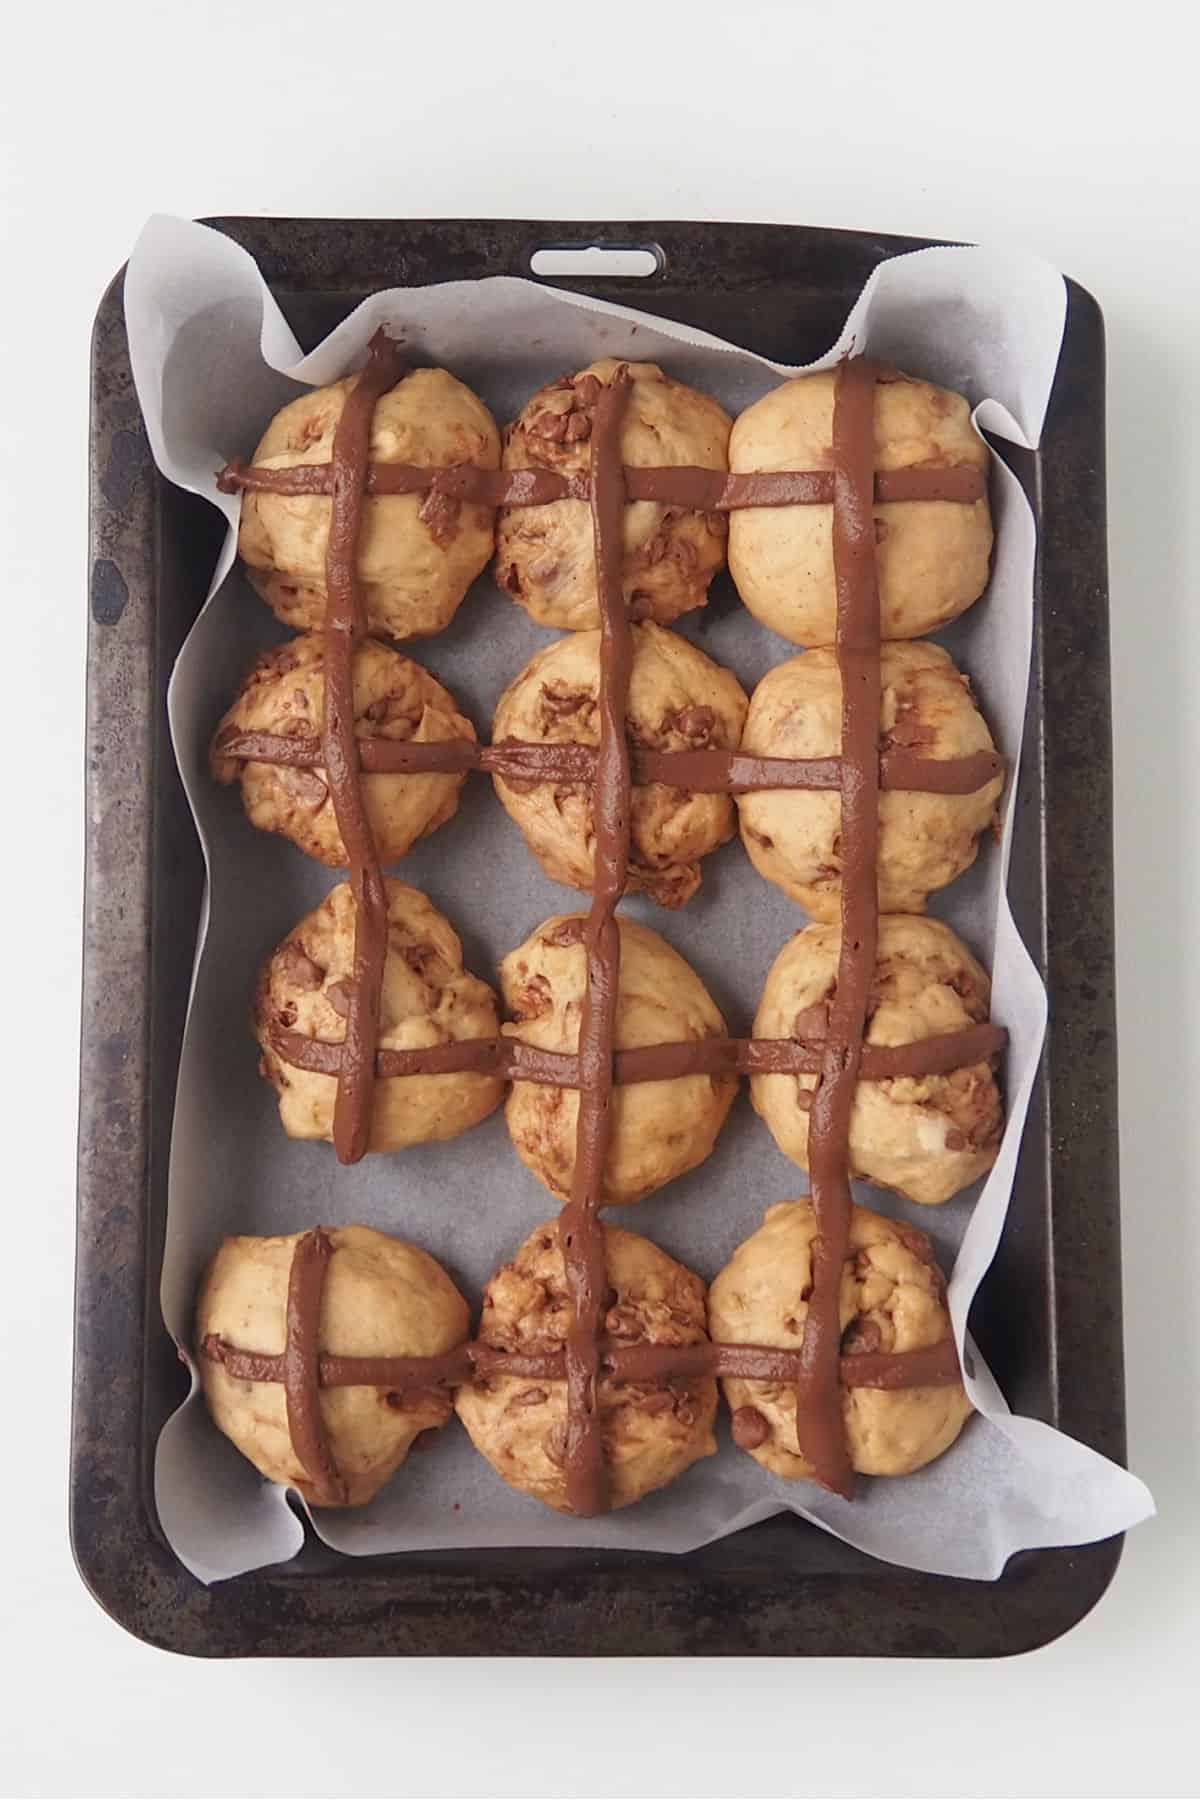 Chocolate Chip Hot Cross Buns with chocolate crosses before going into the oven.